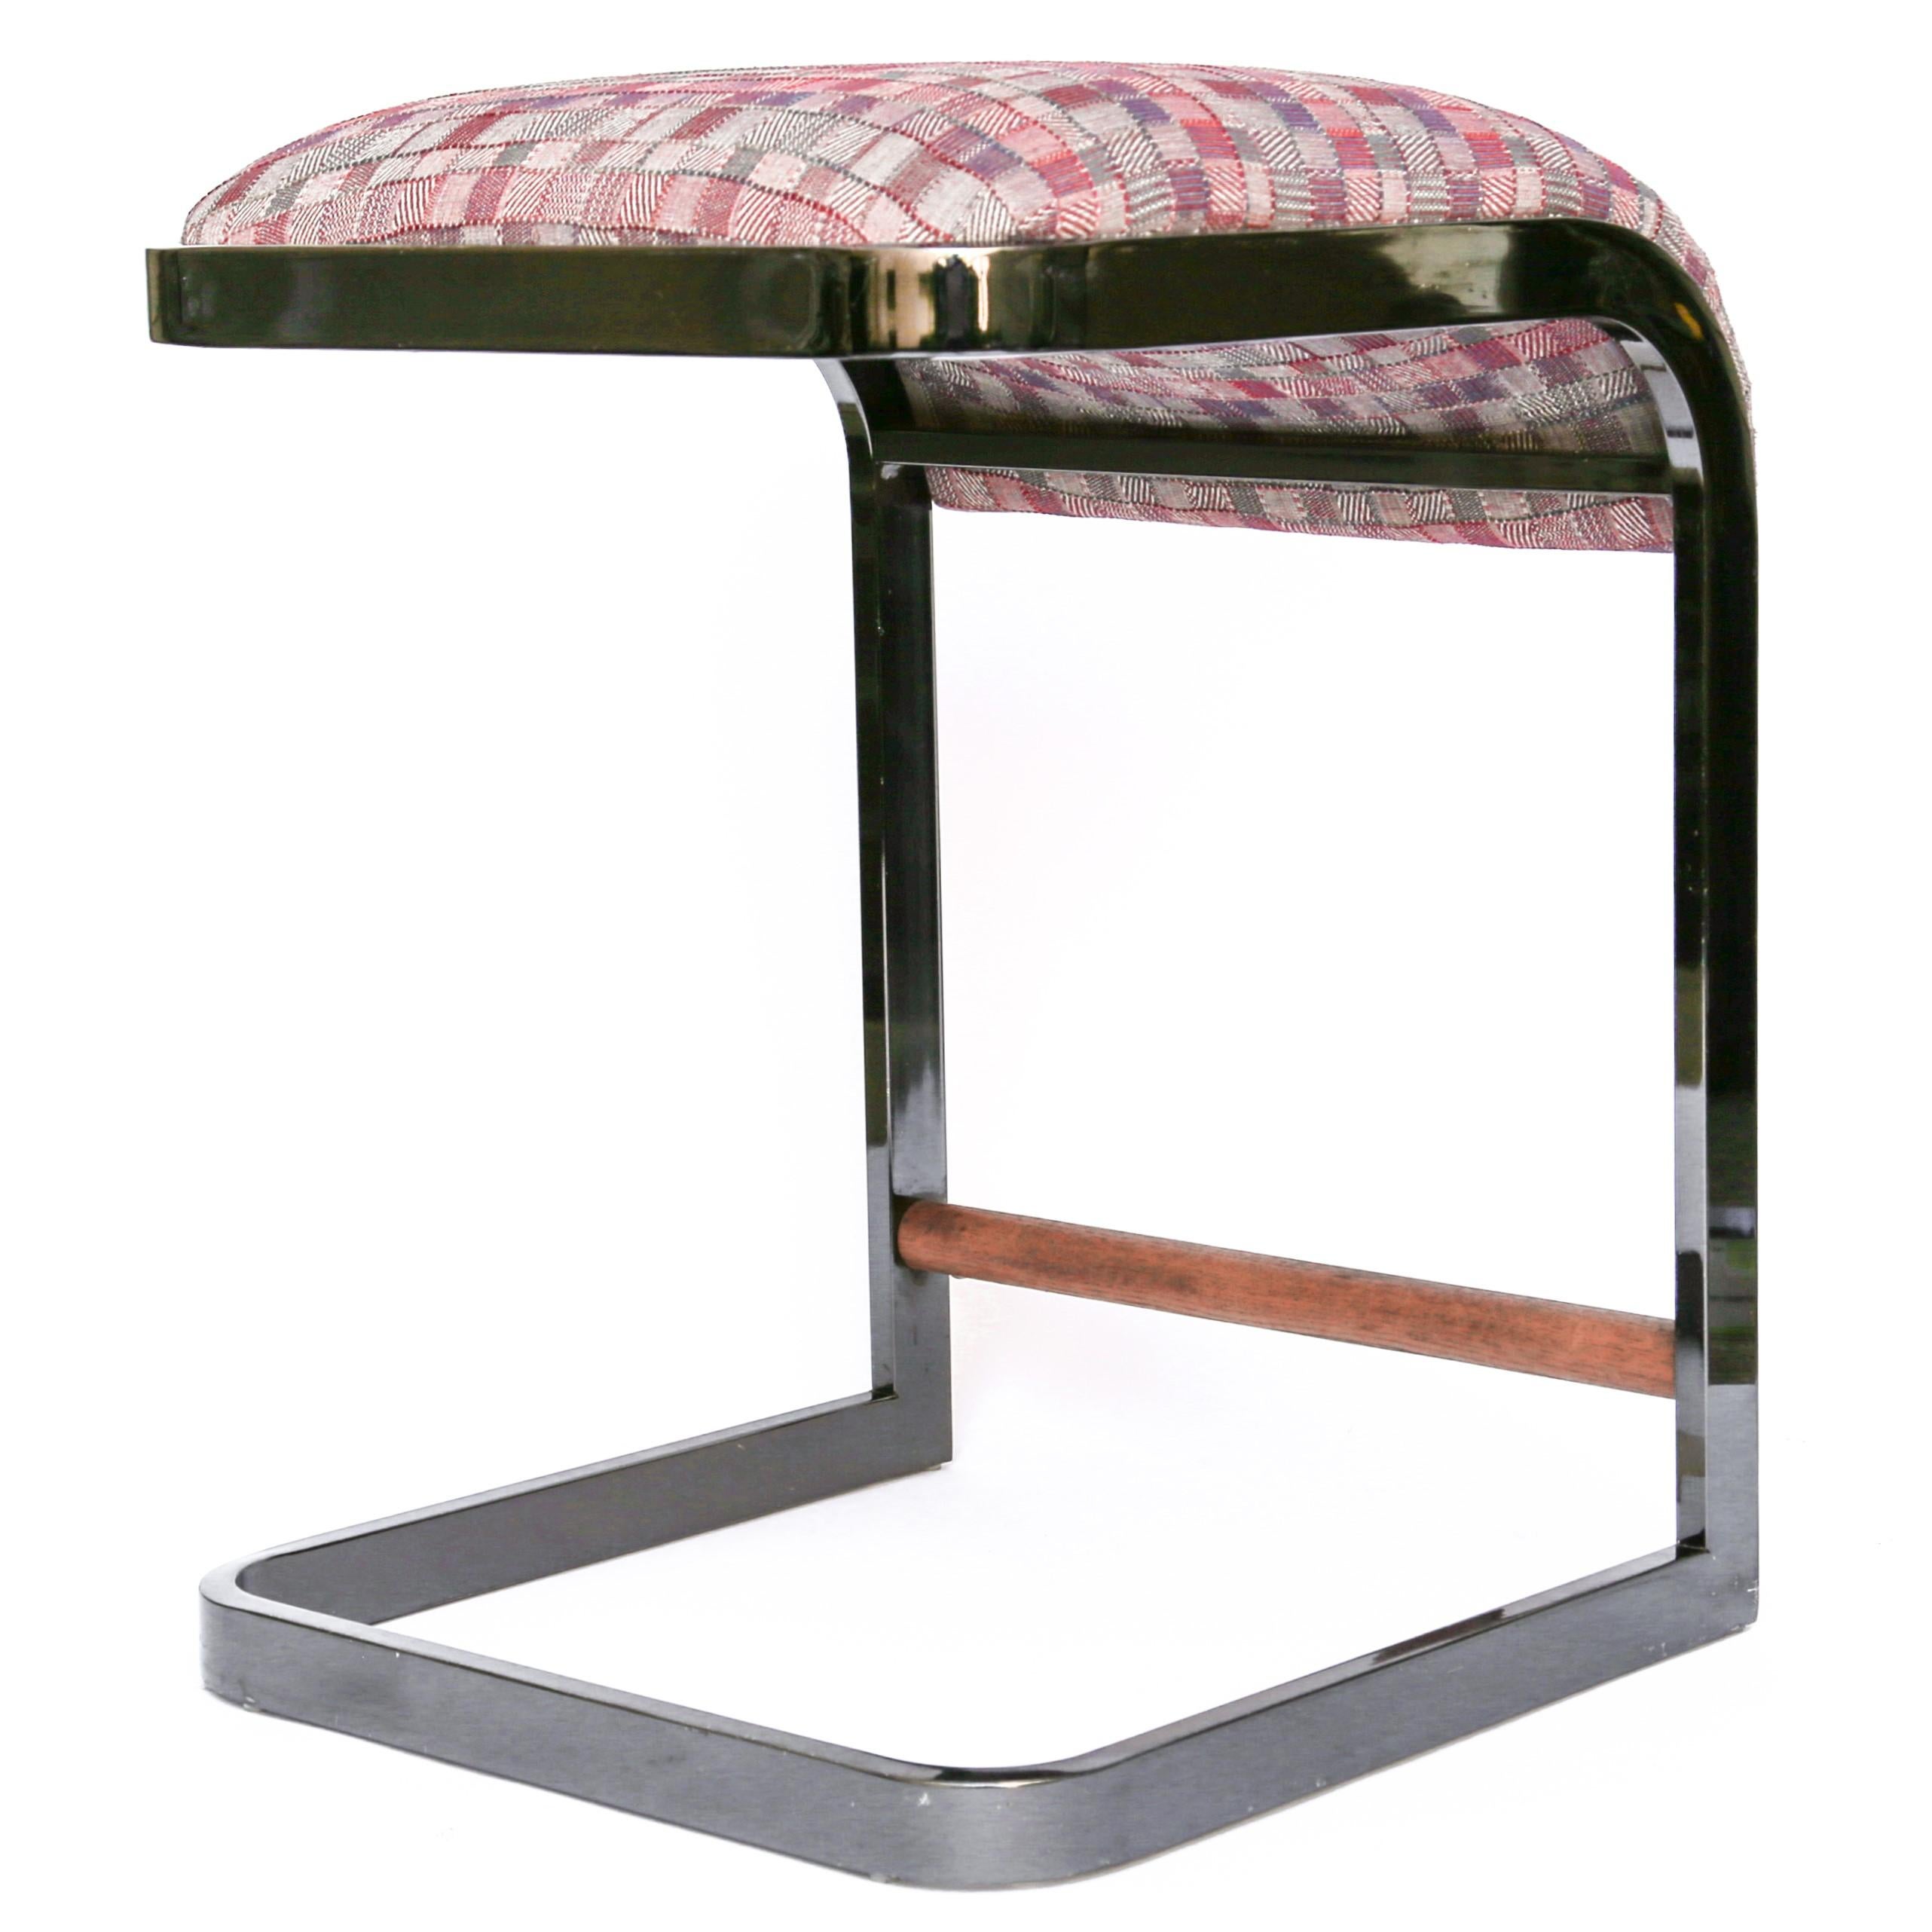 Cantilever Backless Chrome Stool by D I A, Purple Upholstery 1